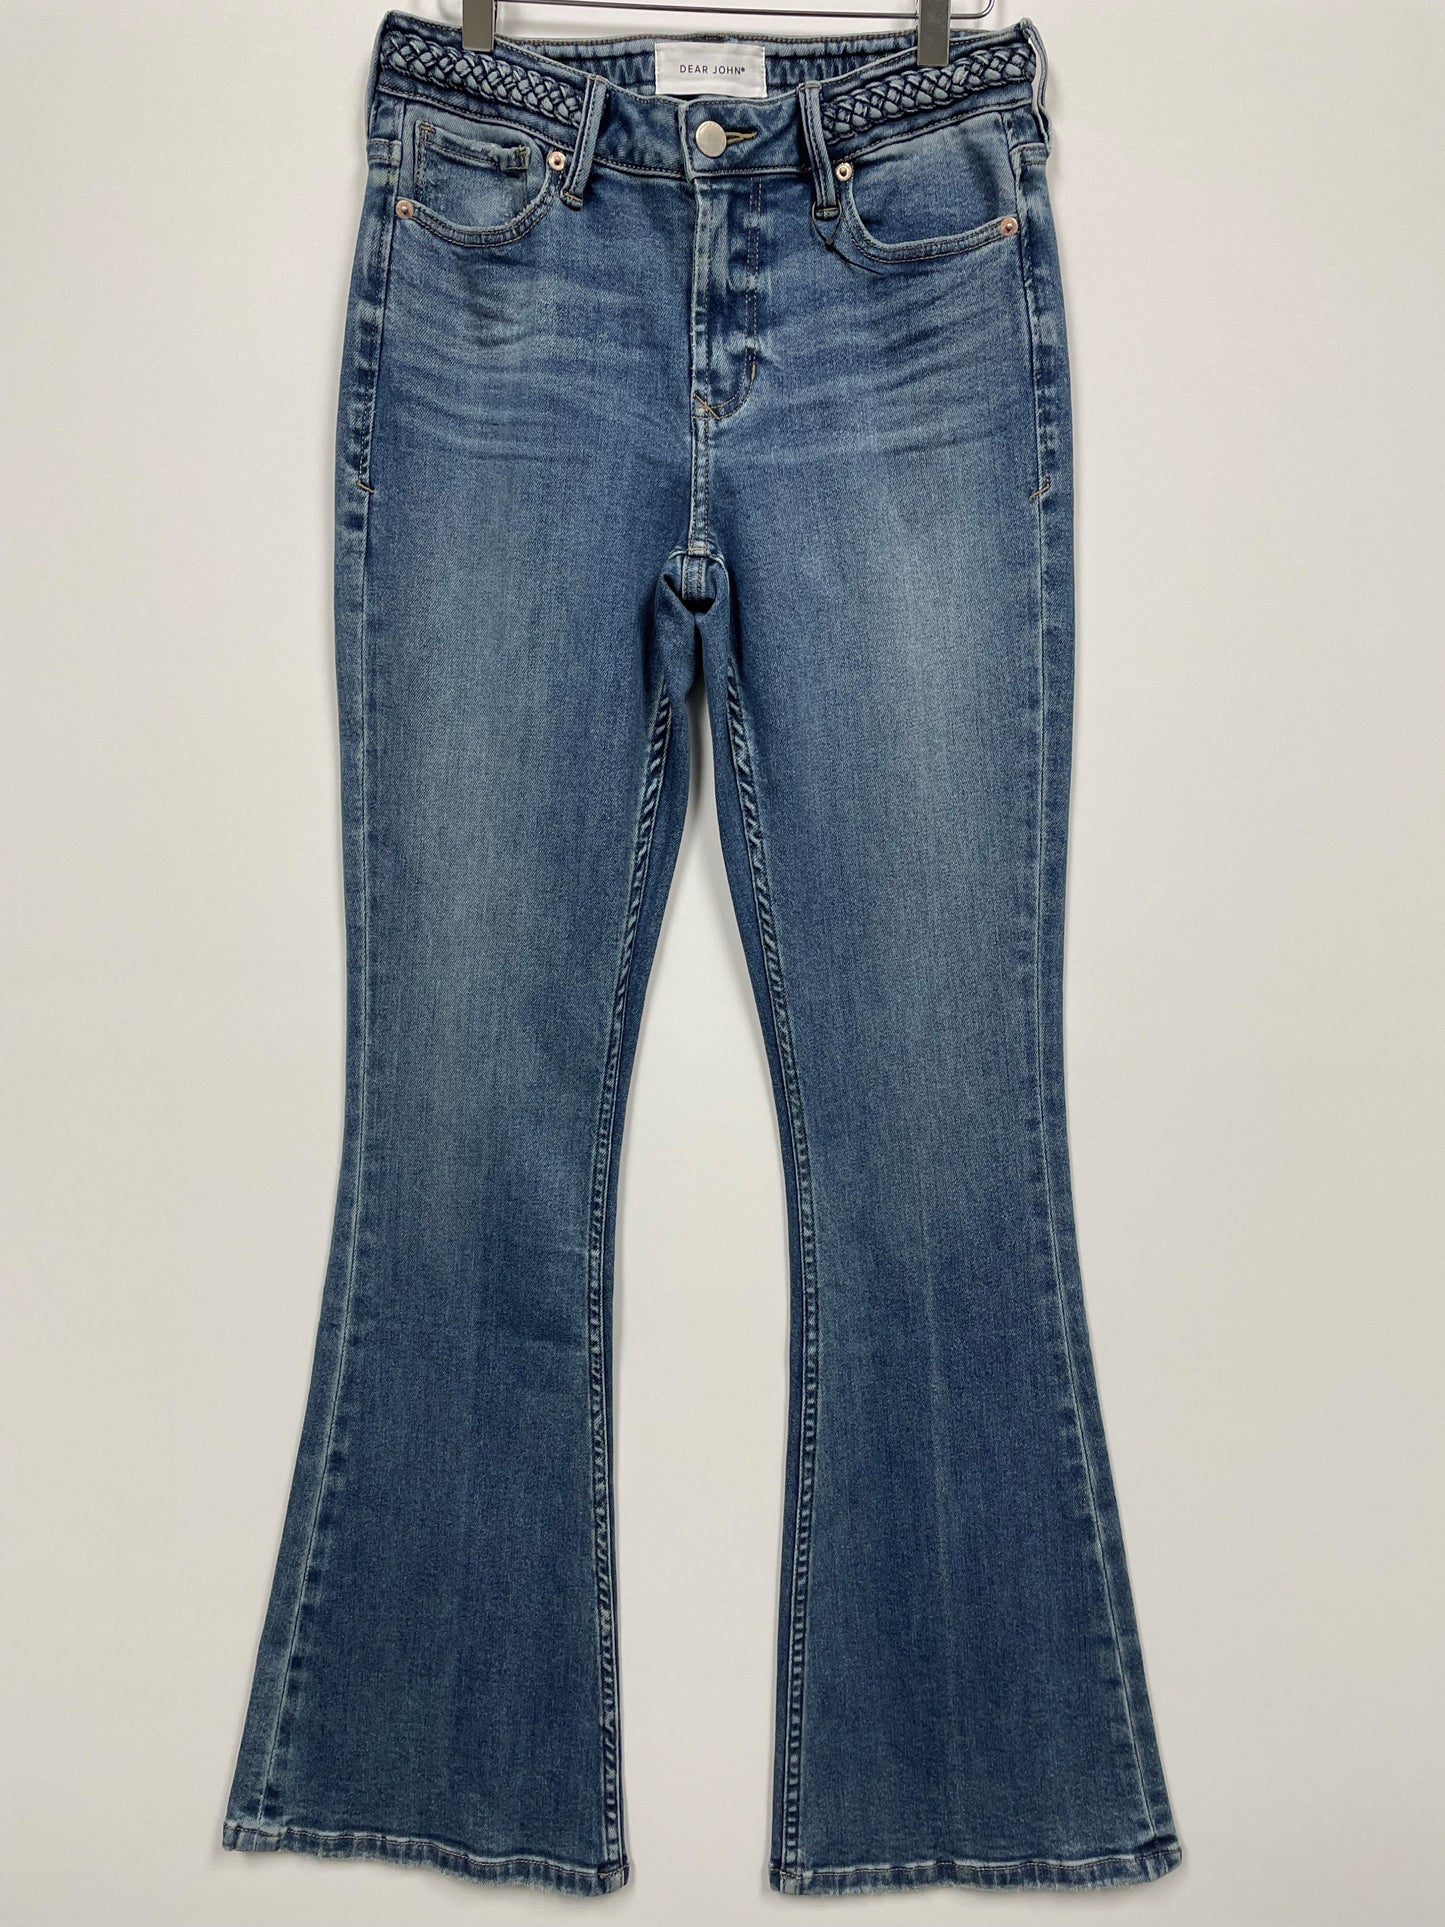 ROSA HIGH RISE FLARE JEANS